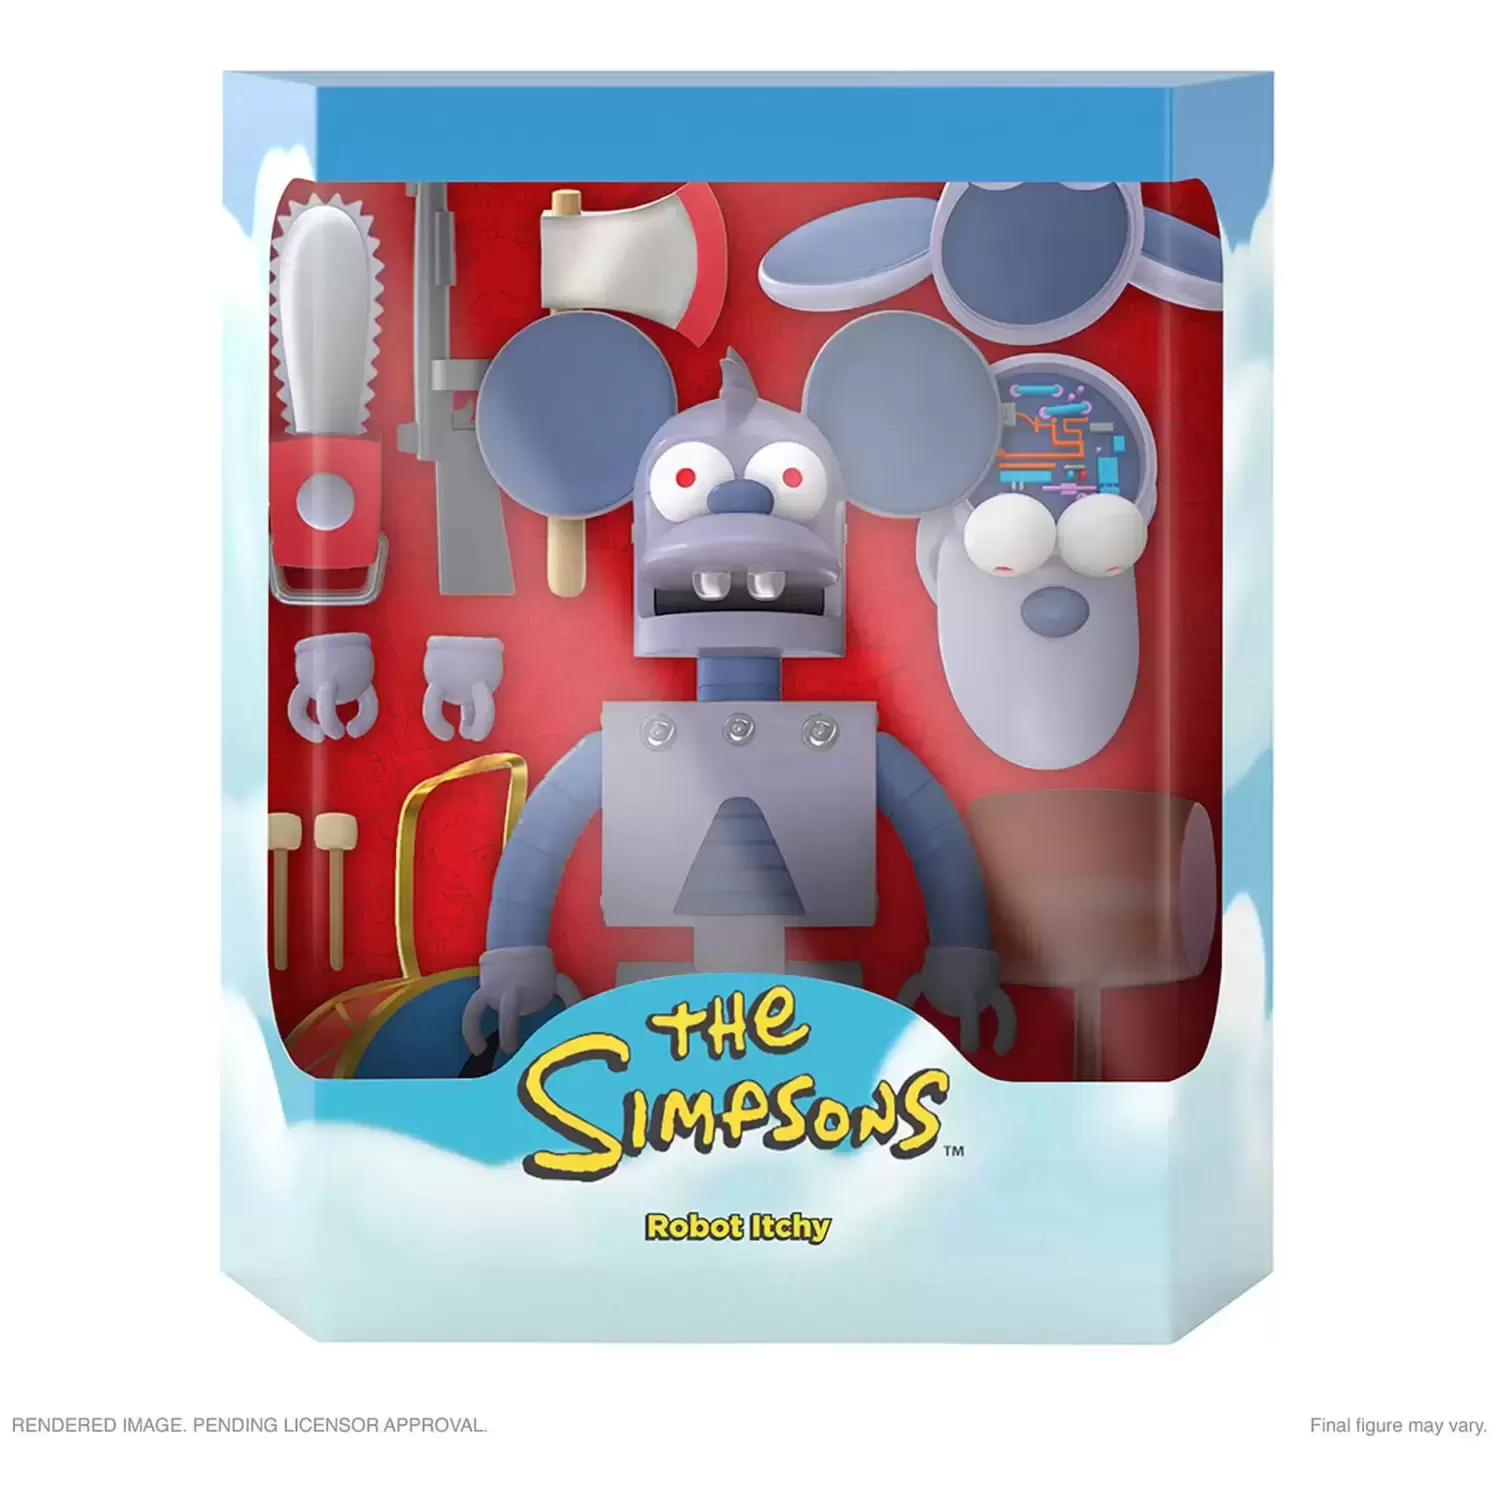 Super7 - ULTIMATES! - The Simpsons - Robot Itchy